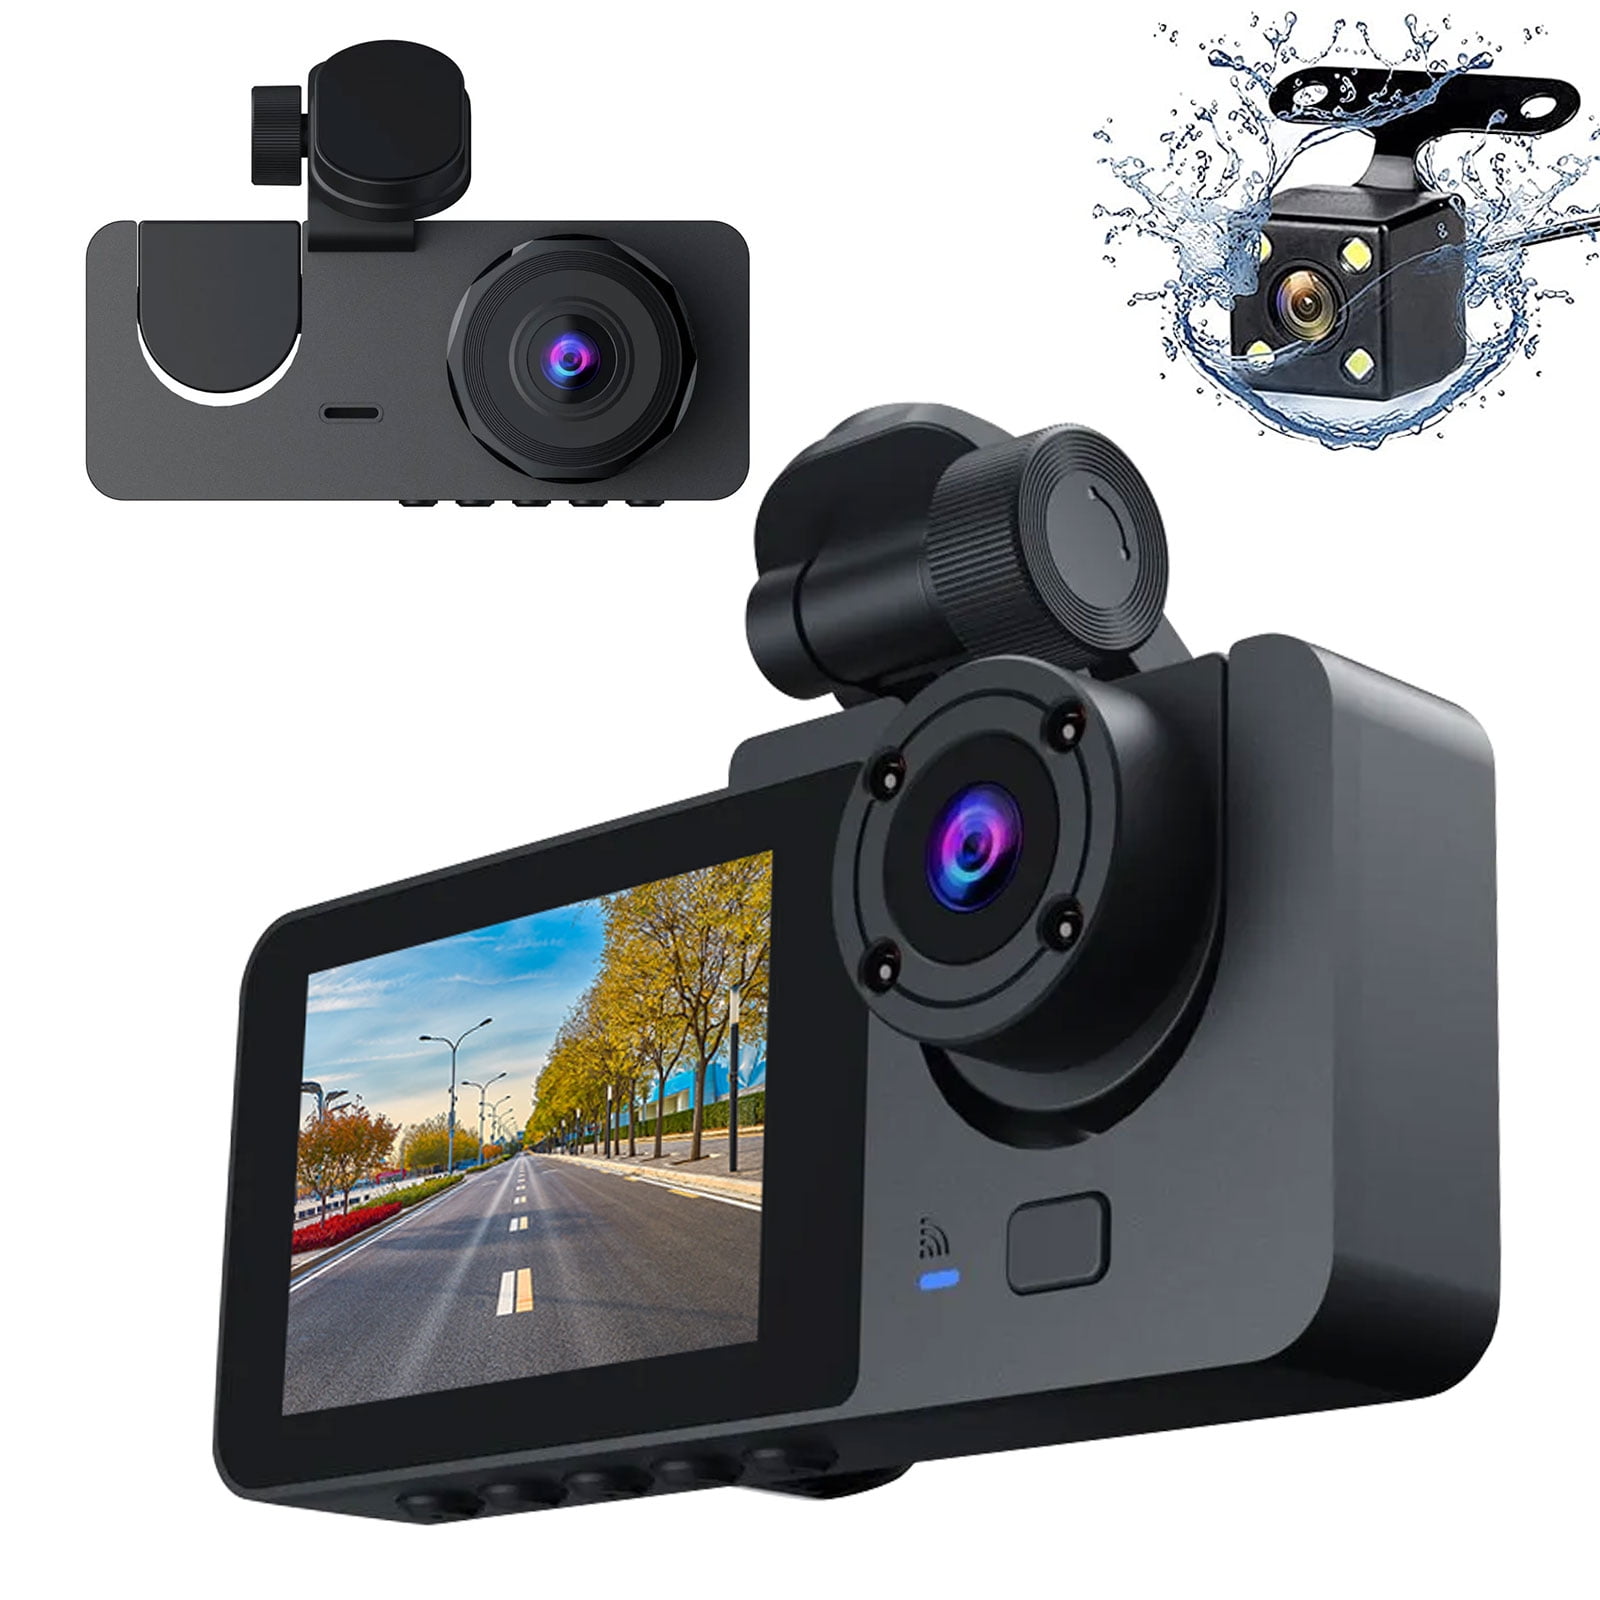 3 Channel Dash Cam, TSV Front Rear Inside, Three Way Triple Dashcams Driving Recorder for Cars with Night Vision WDR, Loop Recording, G-Sensor, 24H Parking Monitor, 170° Wide Angle -